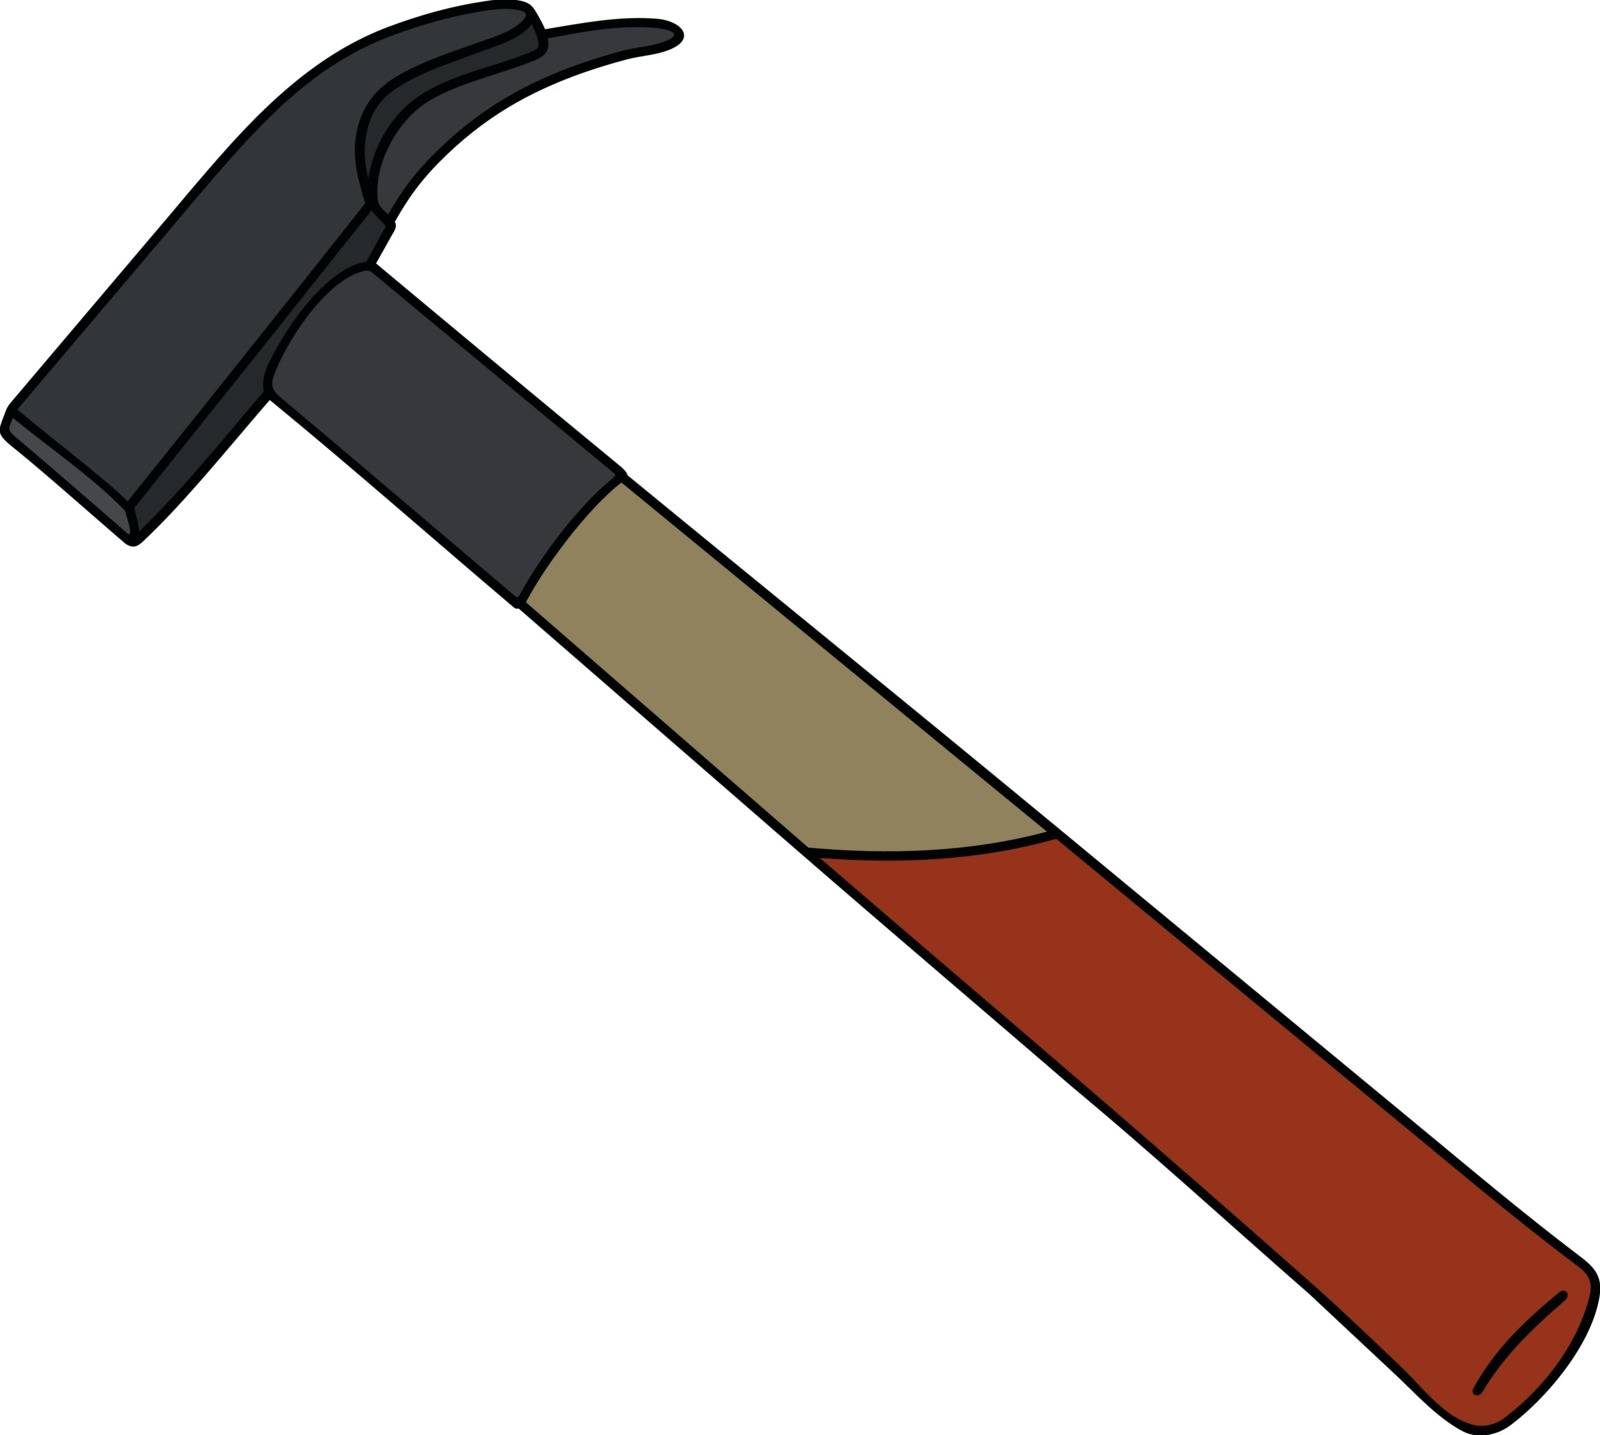 Hand drawing of a classic carpenter hammer